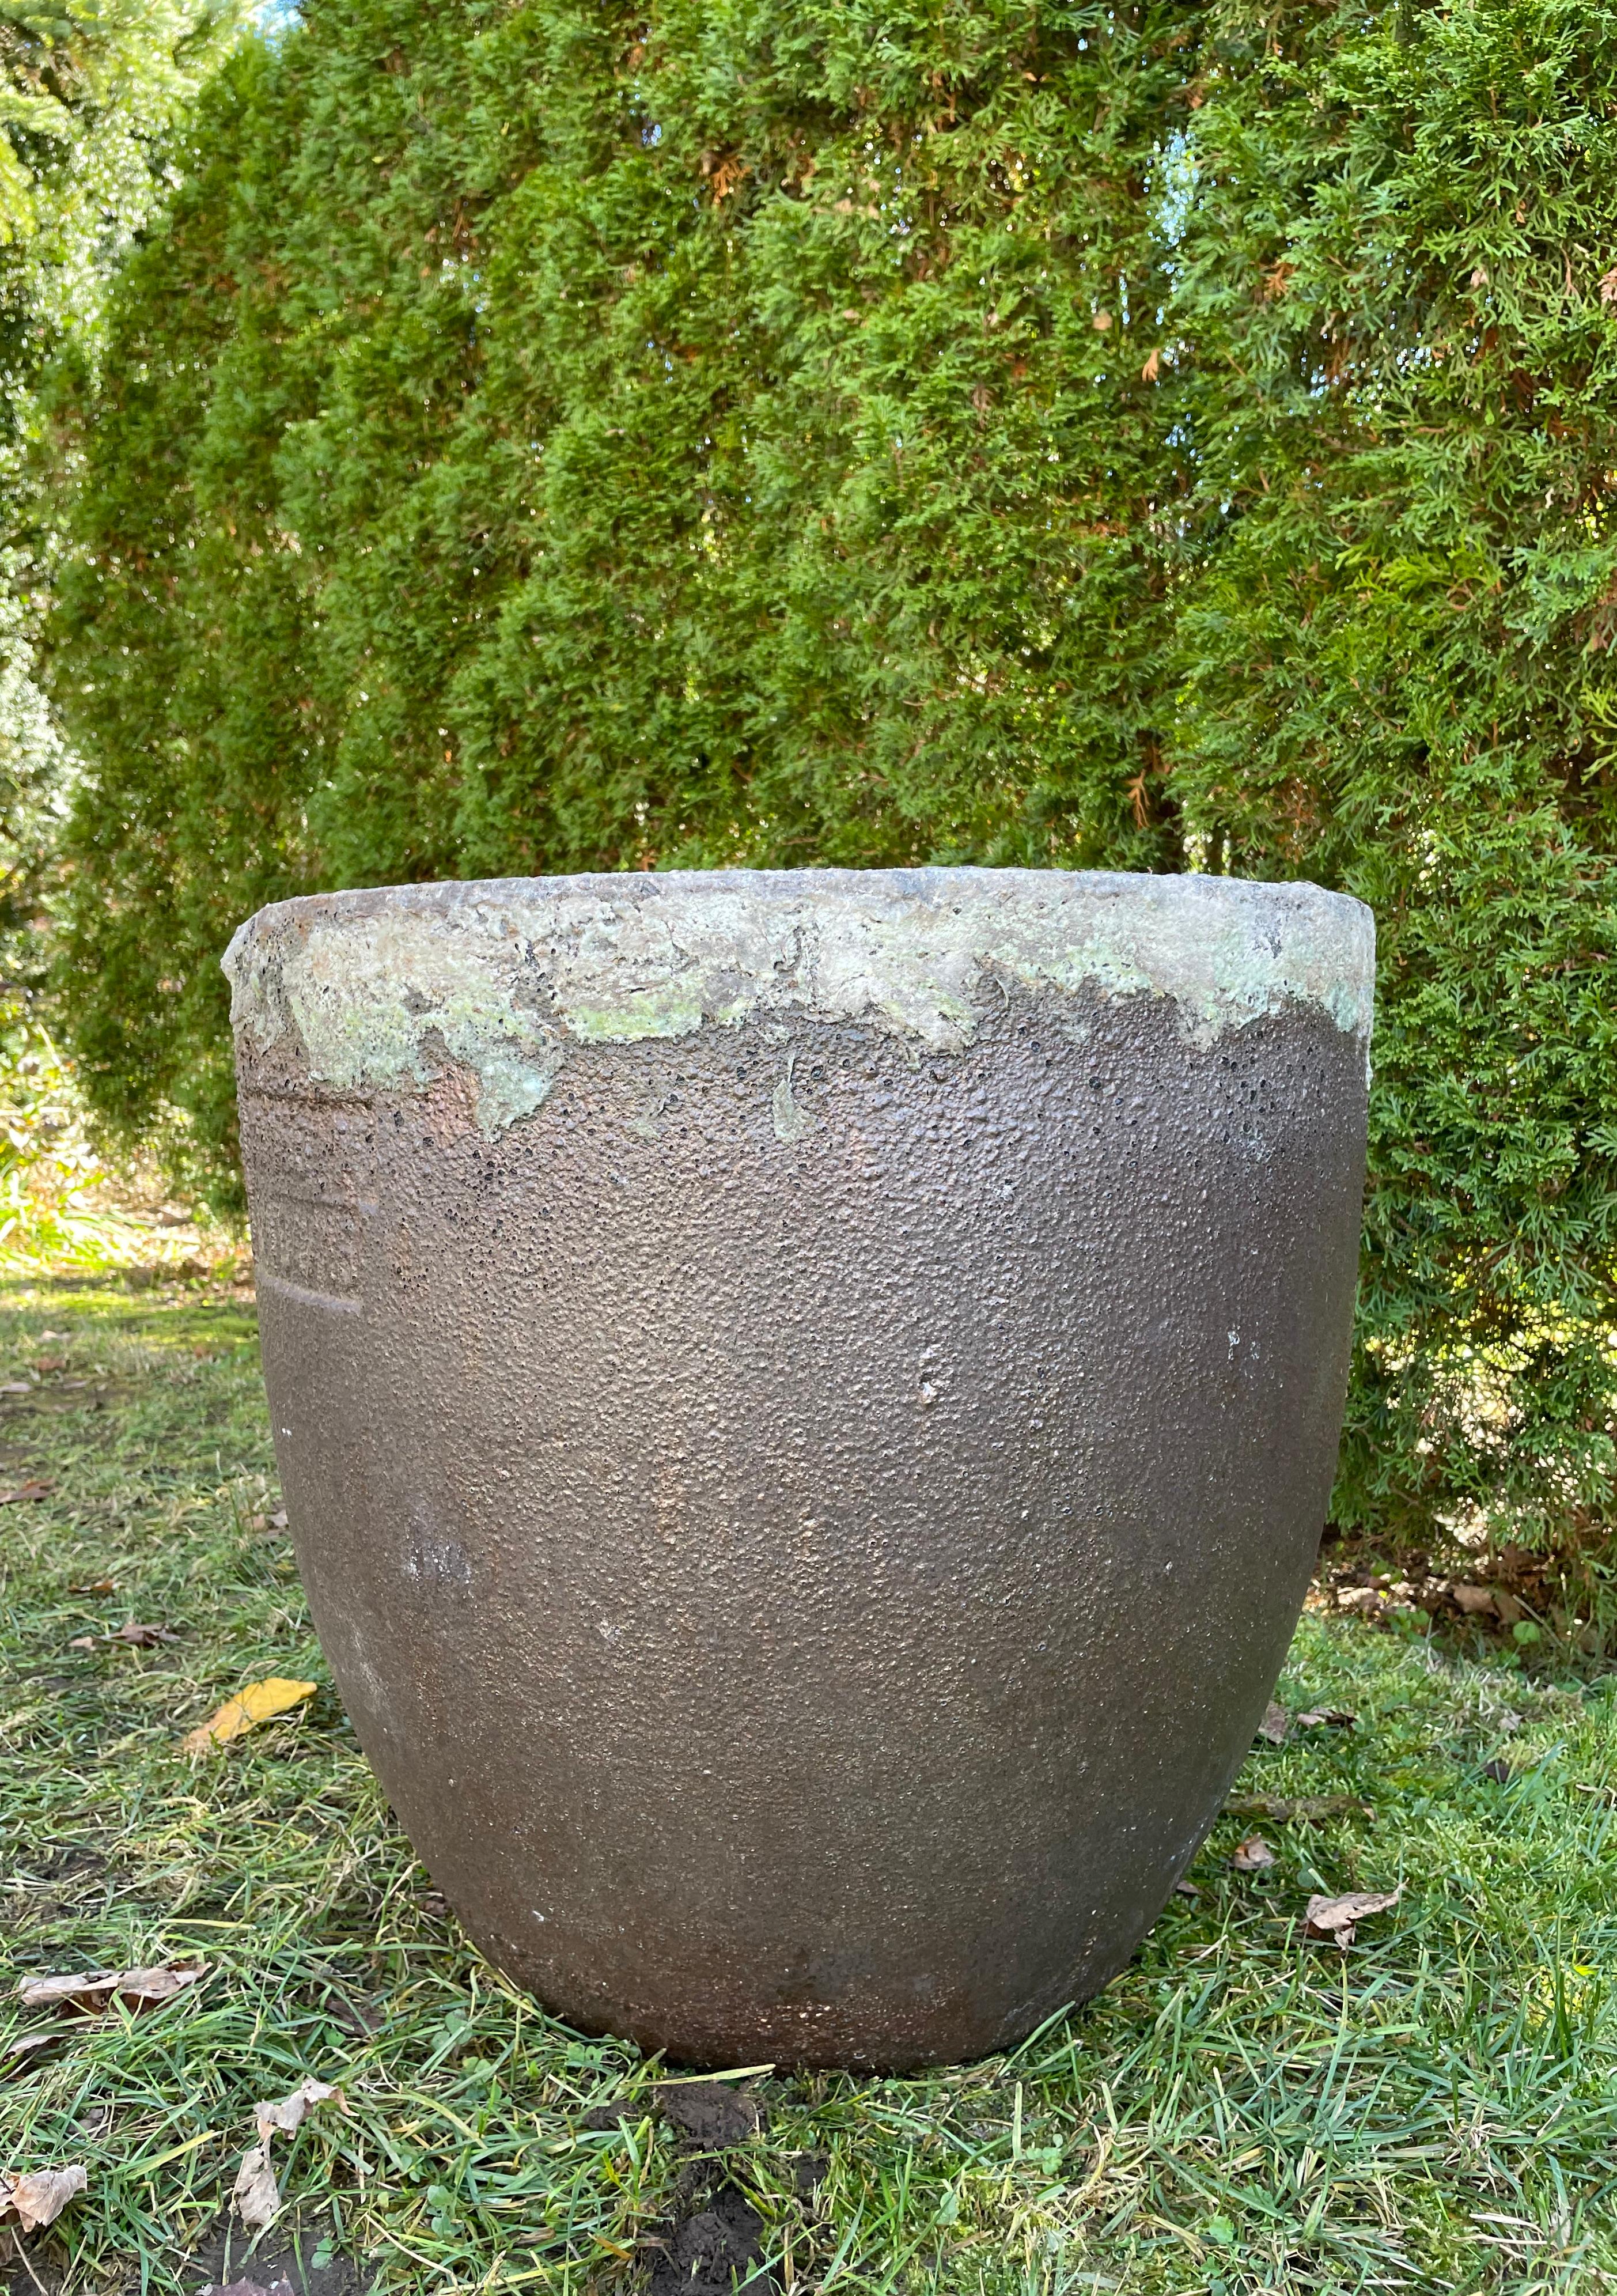 German Copper-Colored Ceramic Crucible Planter In Good Condition For Sale In Woodbury, CT